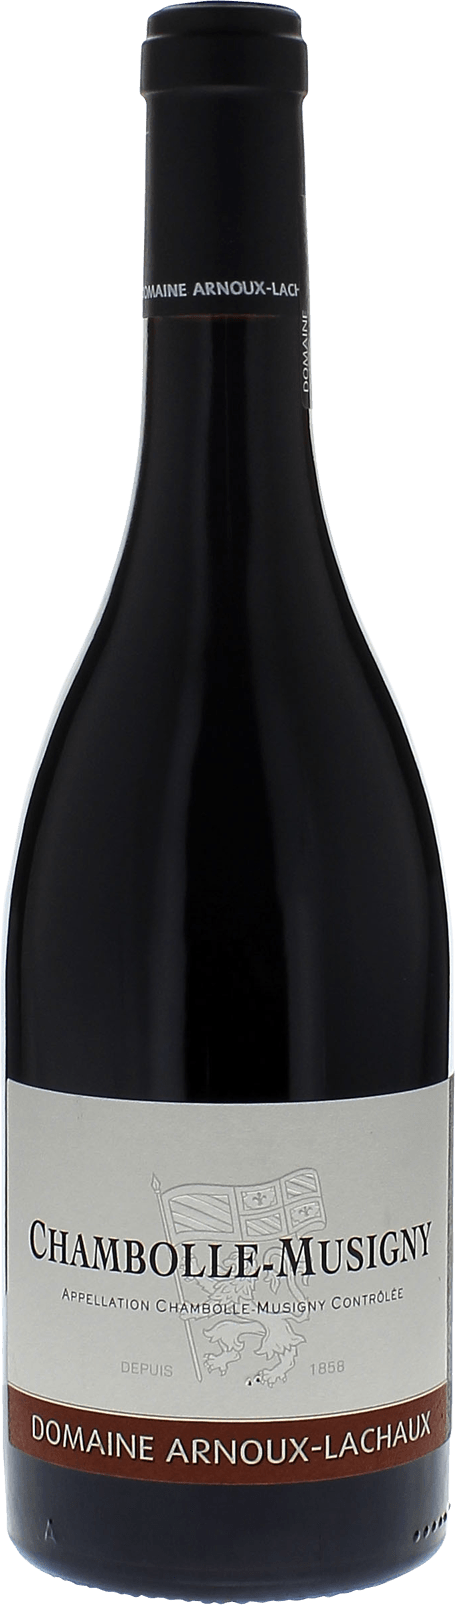 Chambolle musigny 2014 Domaine ARNOUX - LACHAUX, Bourgogne rouge